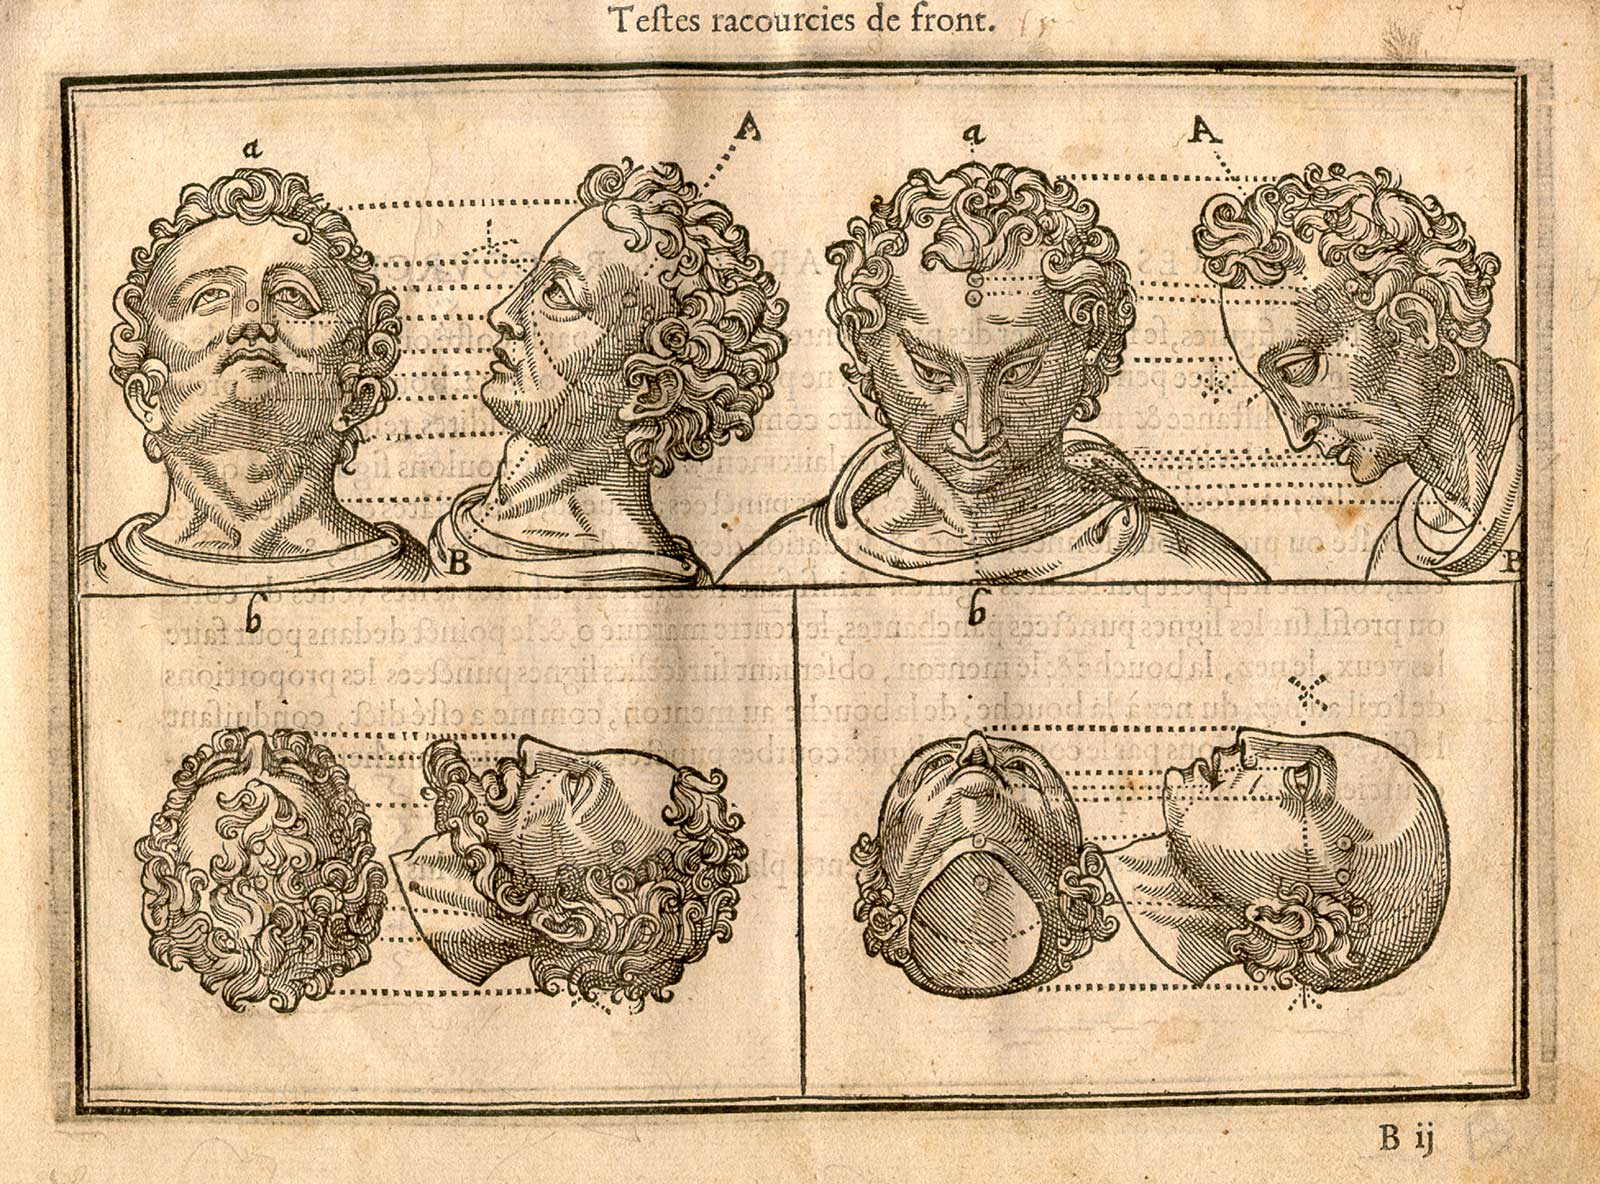 Woodcut illustration showing eight male heads from different positions: from the upper left, a head facing forward but looking upwards, a head facing to the left but looking upwards, a head facing forward but looking downwards, a head facing left but looking downwards; on the lower half of the page, a head viewed from above, a head viewed in profile but looking to the top of the page, a head viewed from below, and a bald head looking upwards to the top of the page, from Jehan Cousin’s Livre de pourtraiture, NLM Call no.: WZ 250 C8673L 1608.